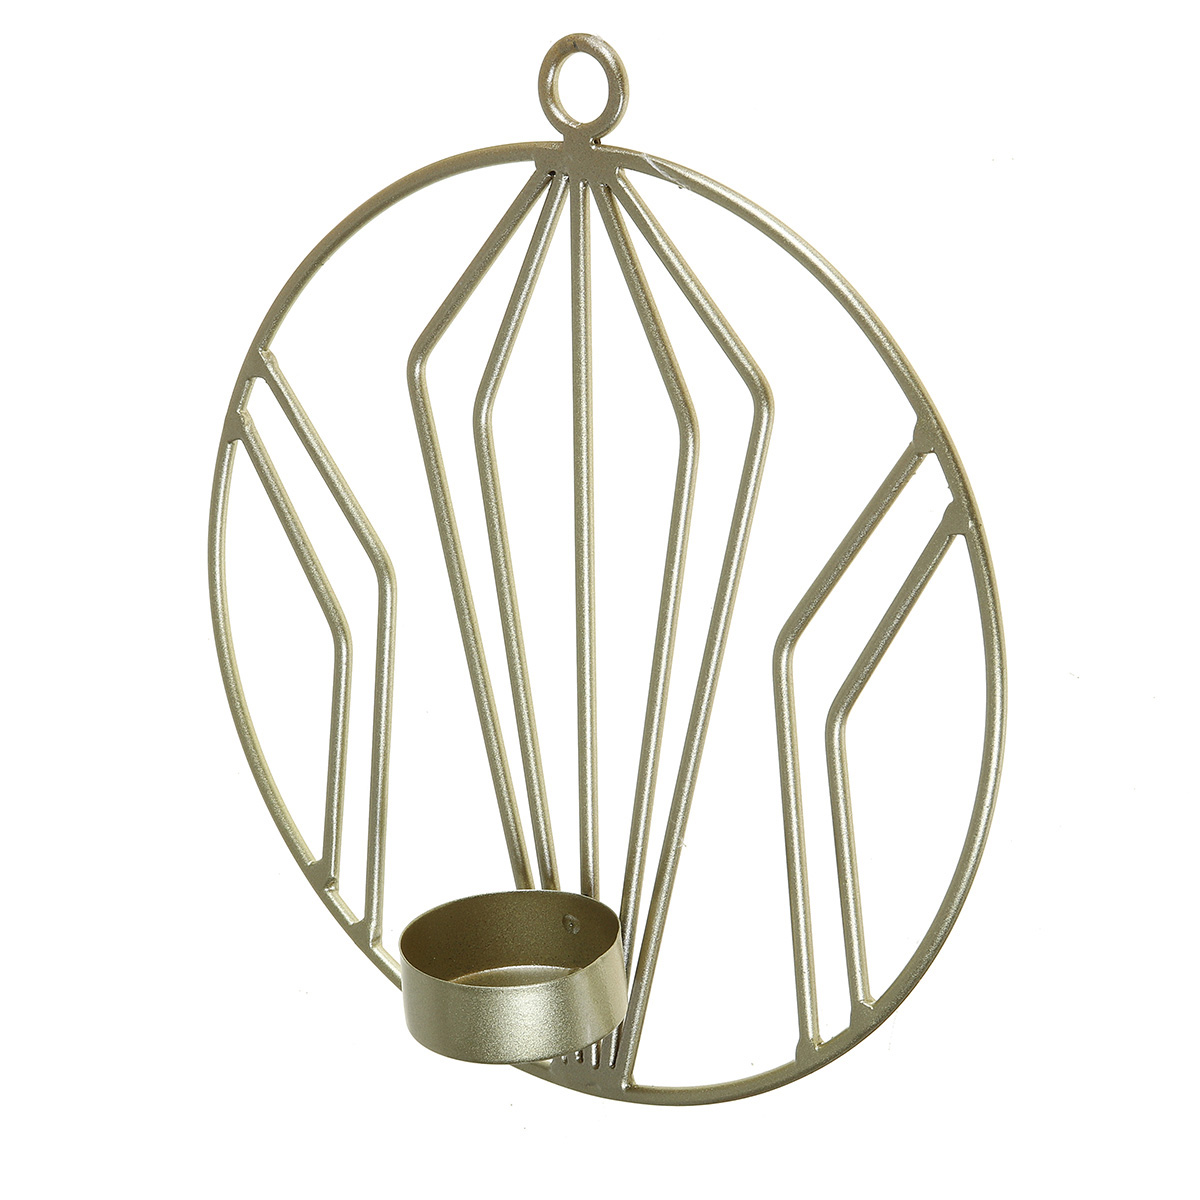 3D-Geometric-Candlestick-Iron-Wall-Candle-Holder-Sconce-Warm-Home-Party-Decor-1727945-16